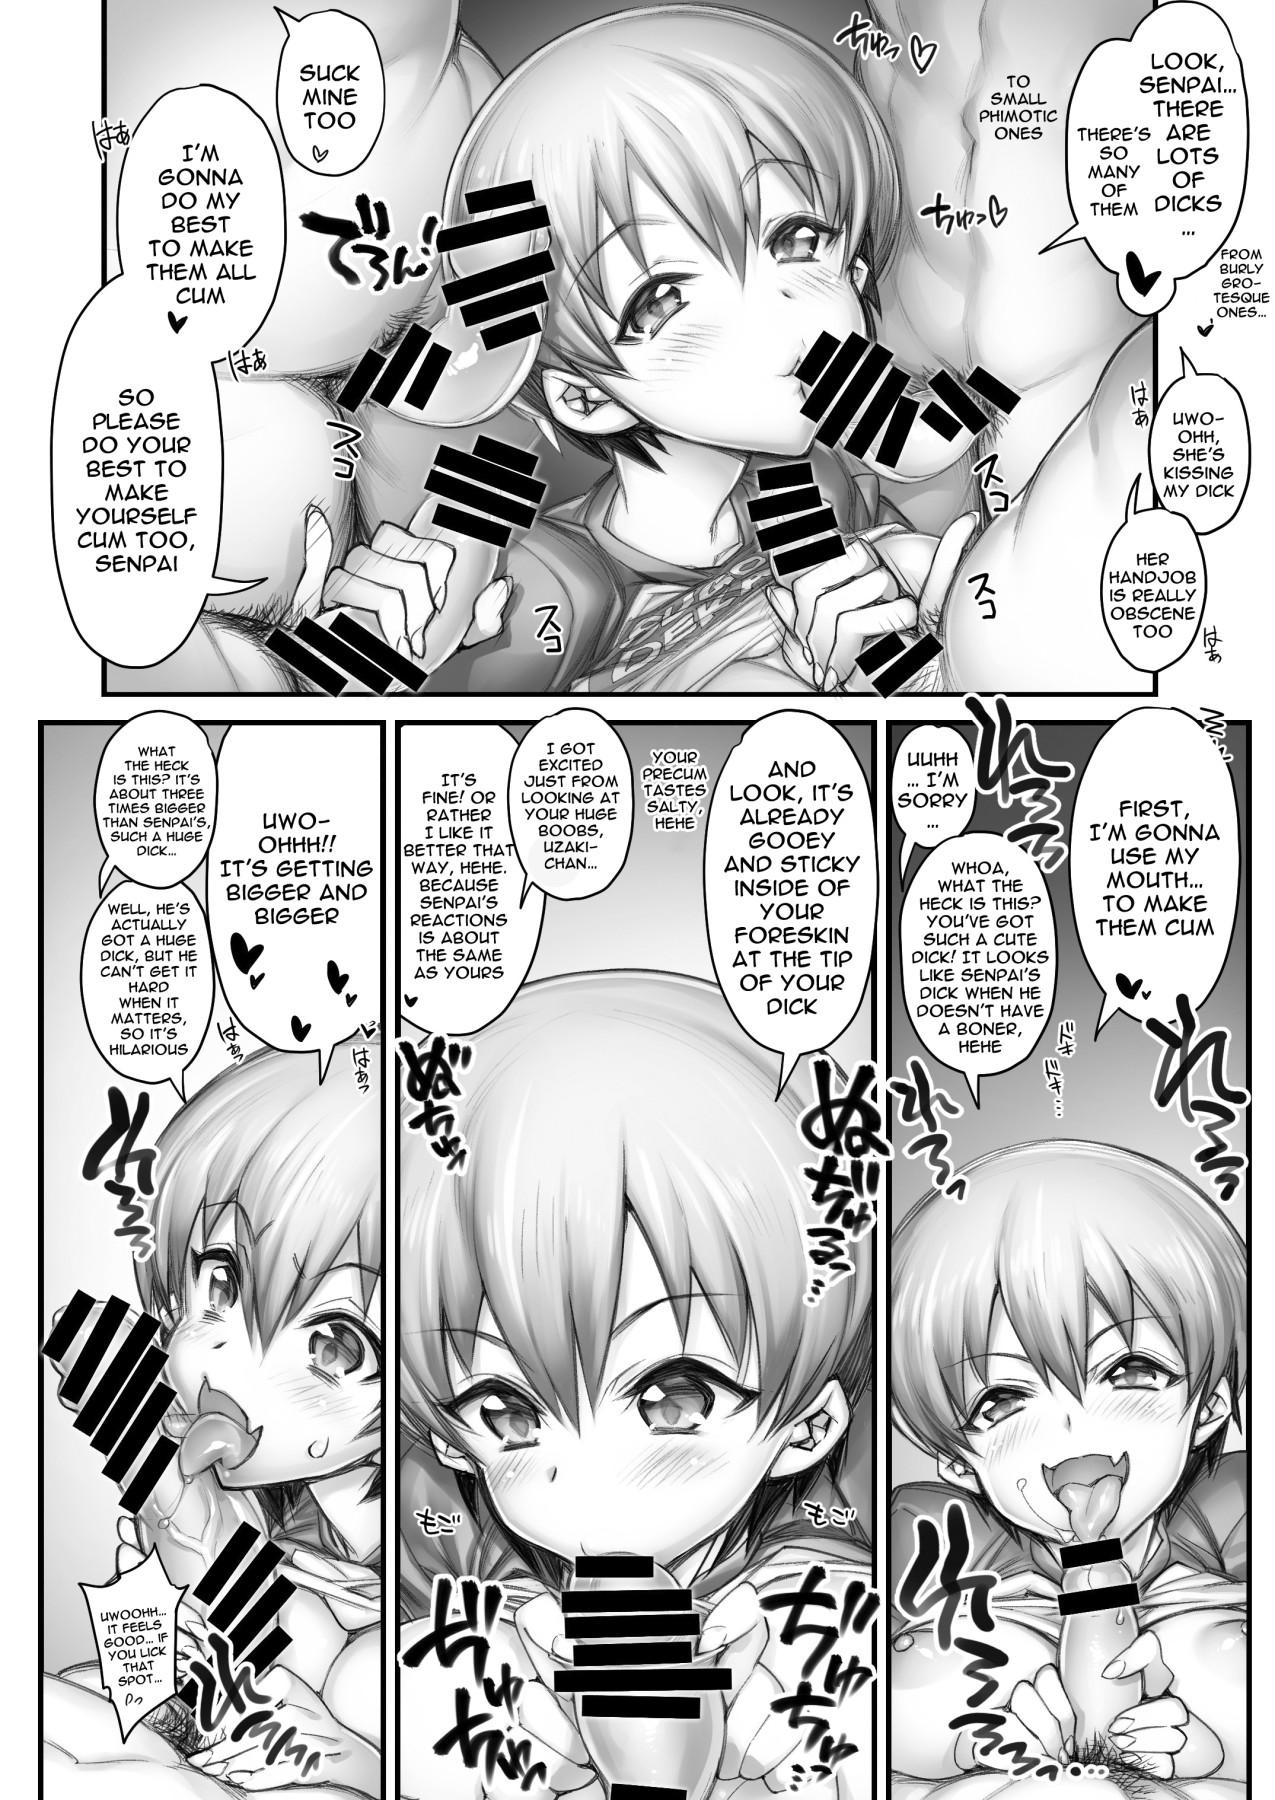 Culito Uzaki-chan Wants To Message To Senpai Videos Of Her Having Sex With Lots of Men!! - Uzaki-chan wa asobitai Cum On Face - Page 4